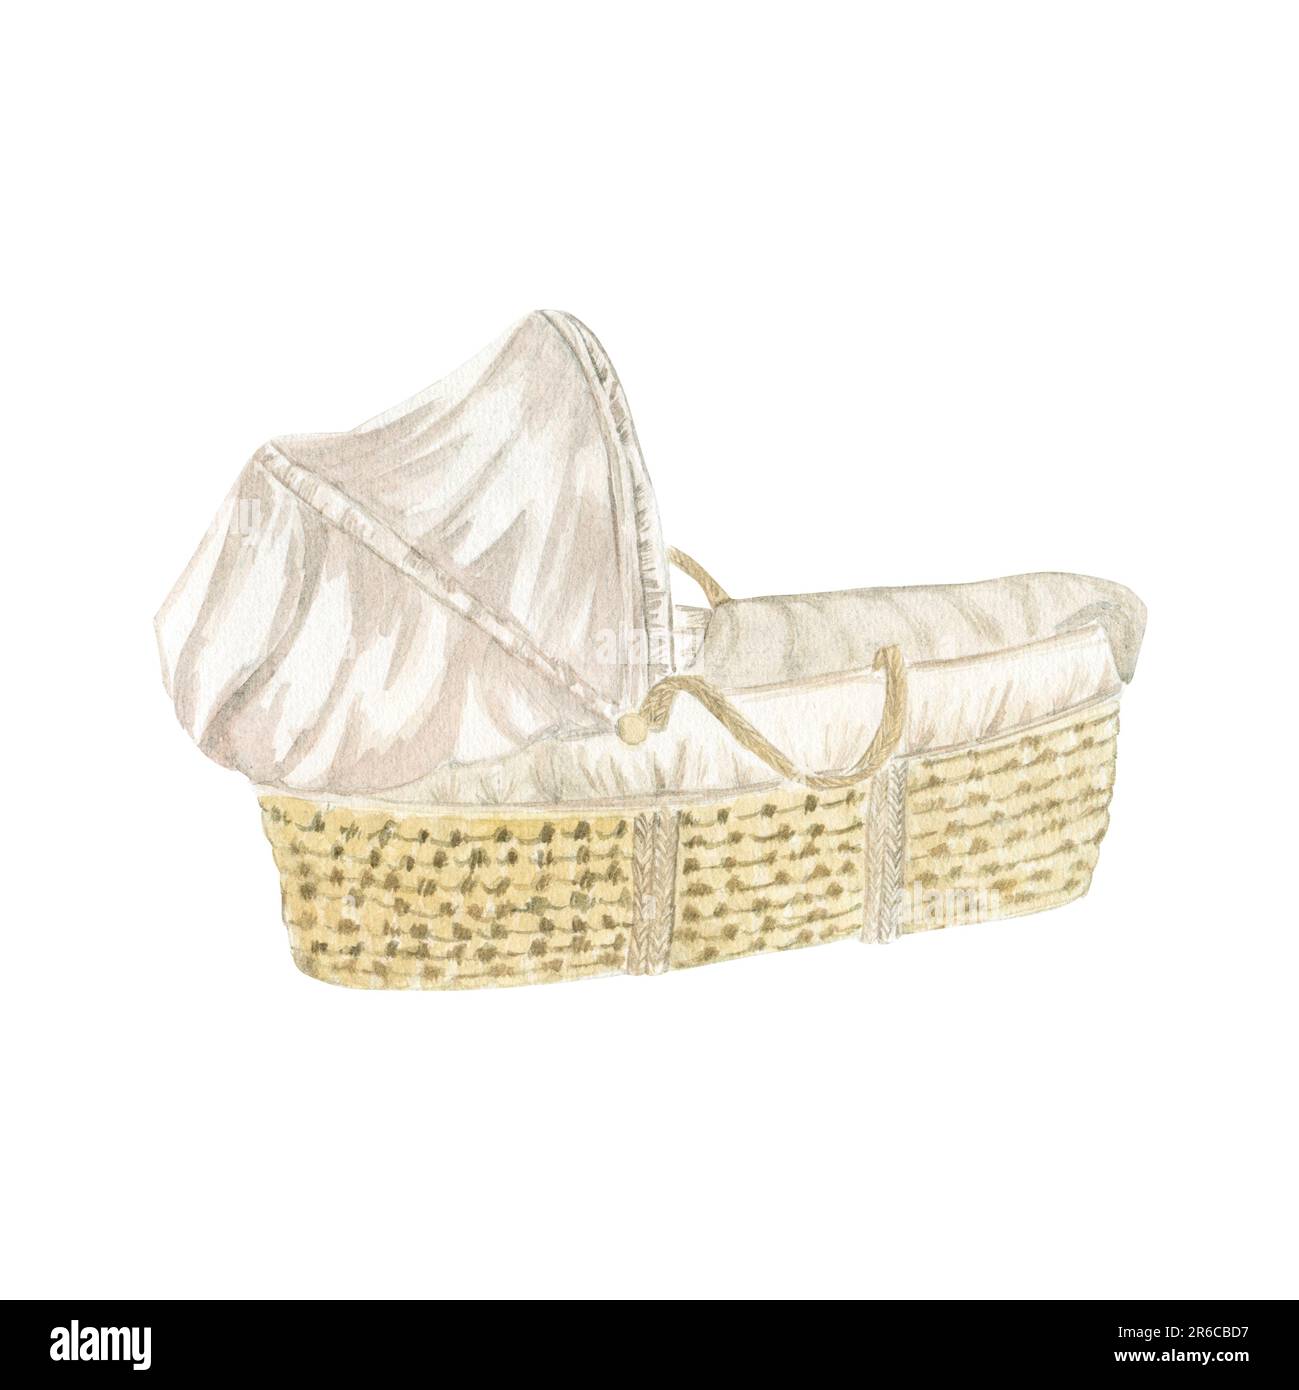 A wicker cradle with handles for a newborn with a beige bedspread. Watercolor illustration, hand-drawn and isolated on a white background. suitable Stock Photo